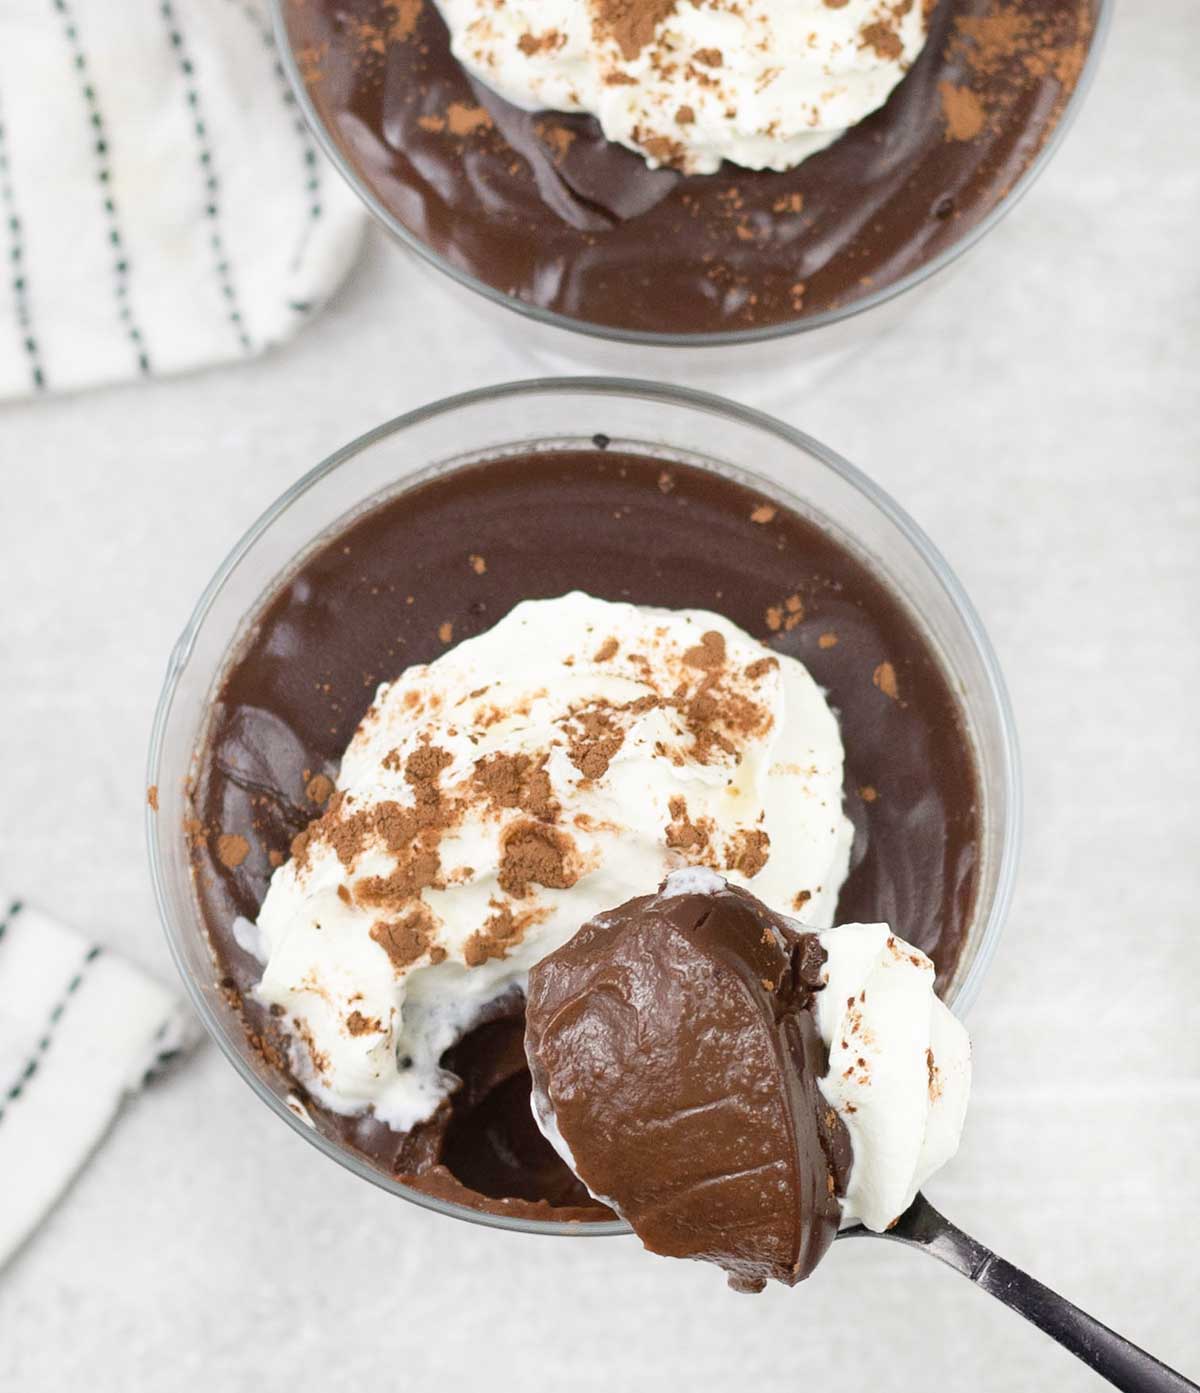 spoonful of Chocolate Pots topped with whipped cream and cocoa powder.